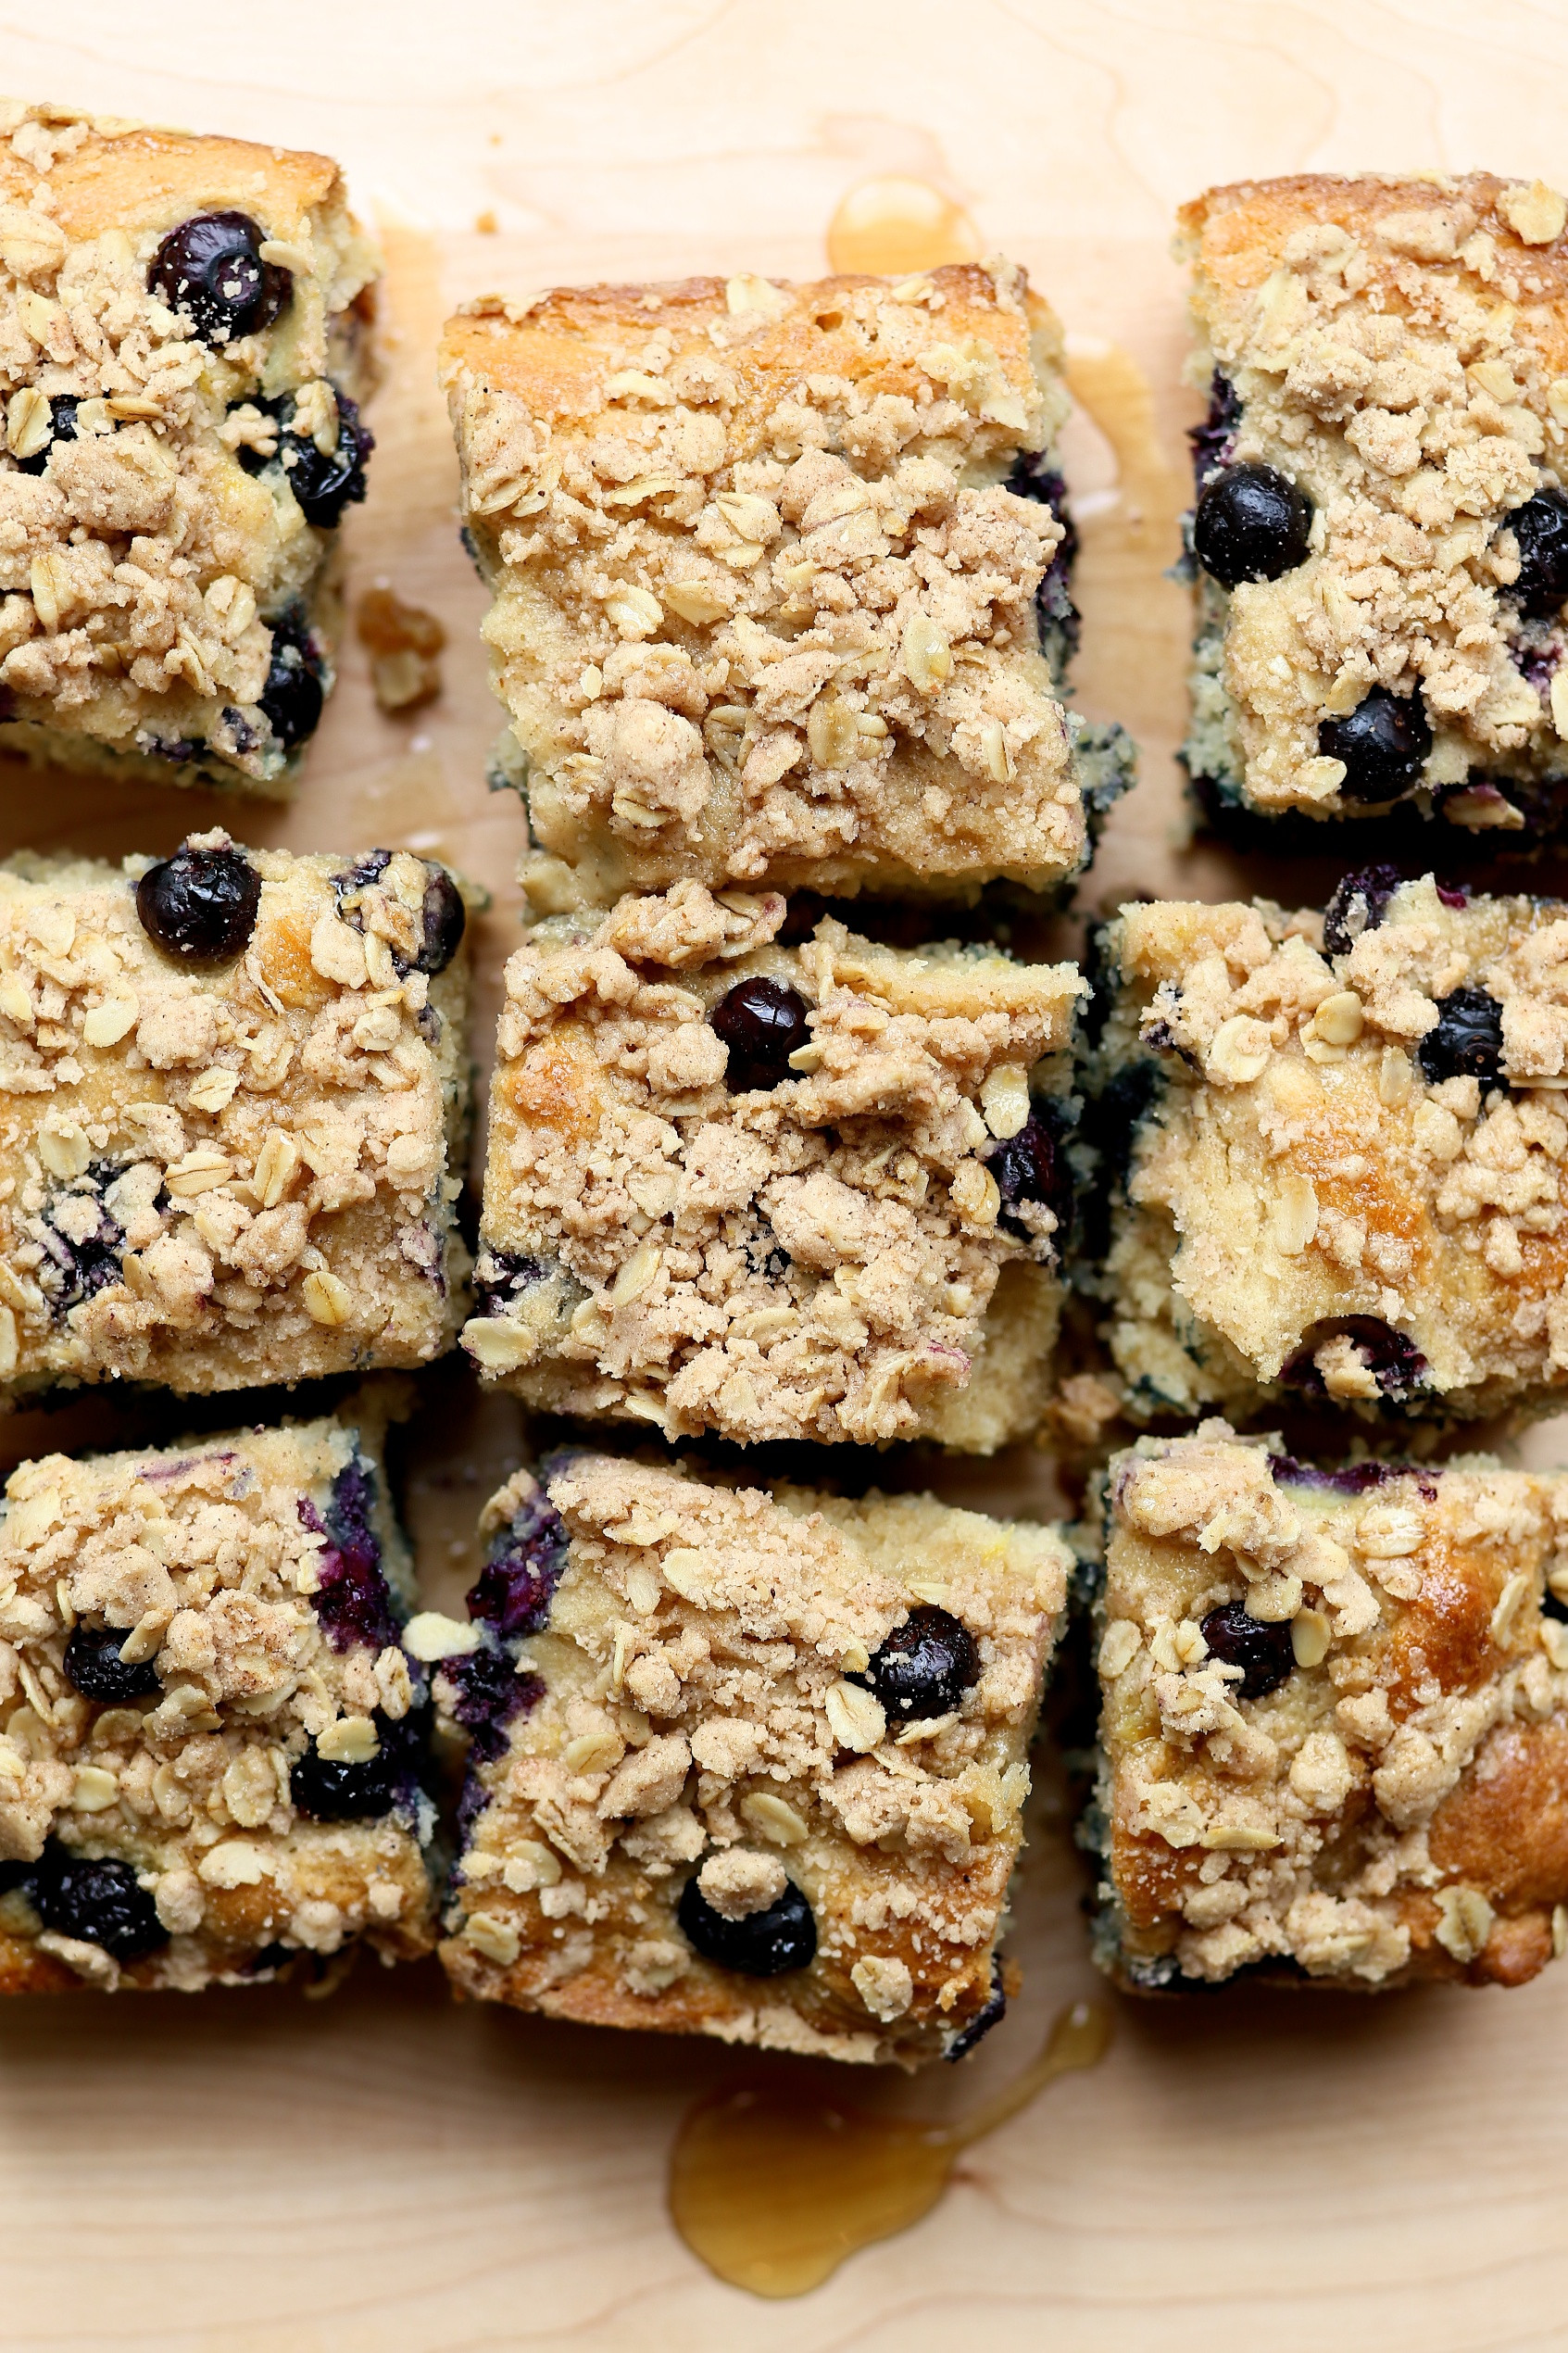 Gluten Free Blueberry Coffee Cake Awesome Gluten Free Lemon Blueberry Coffee Cake